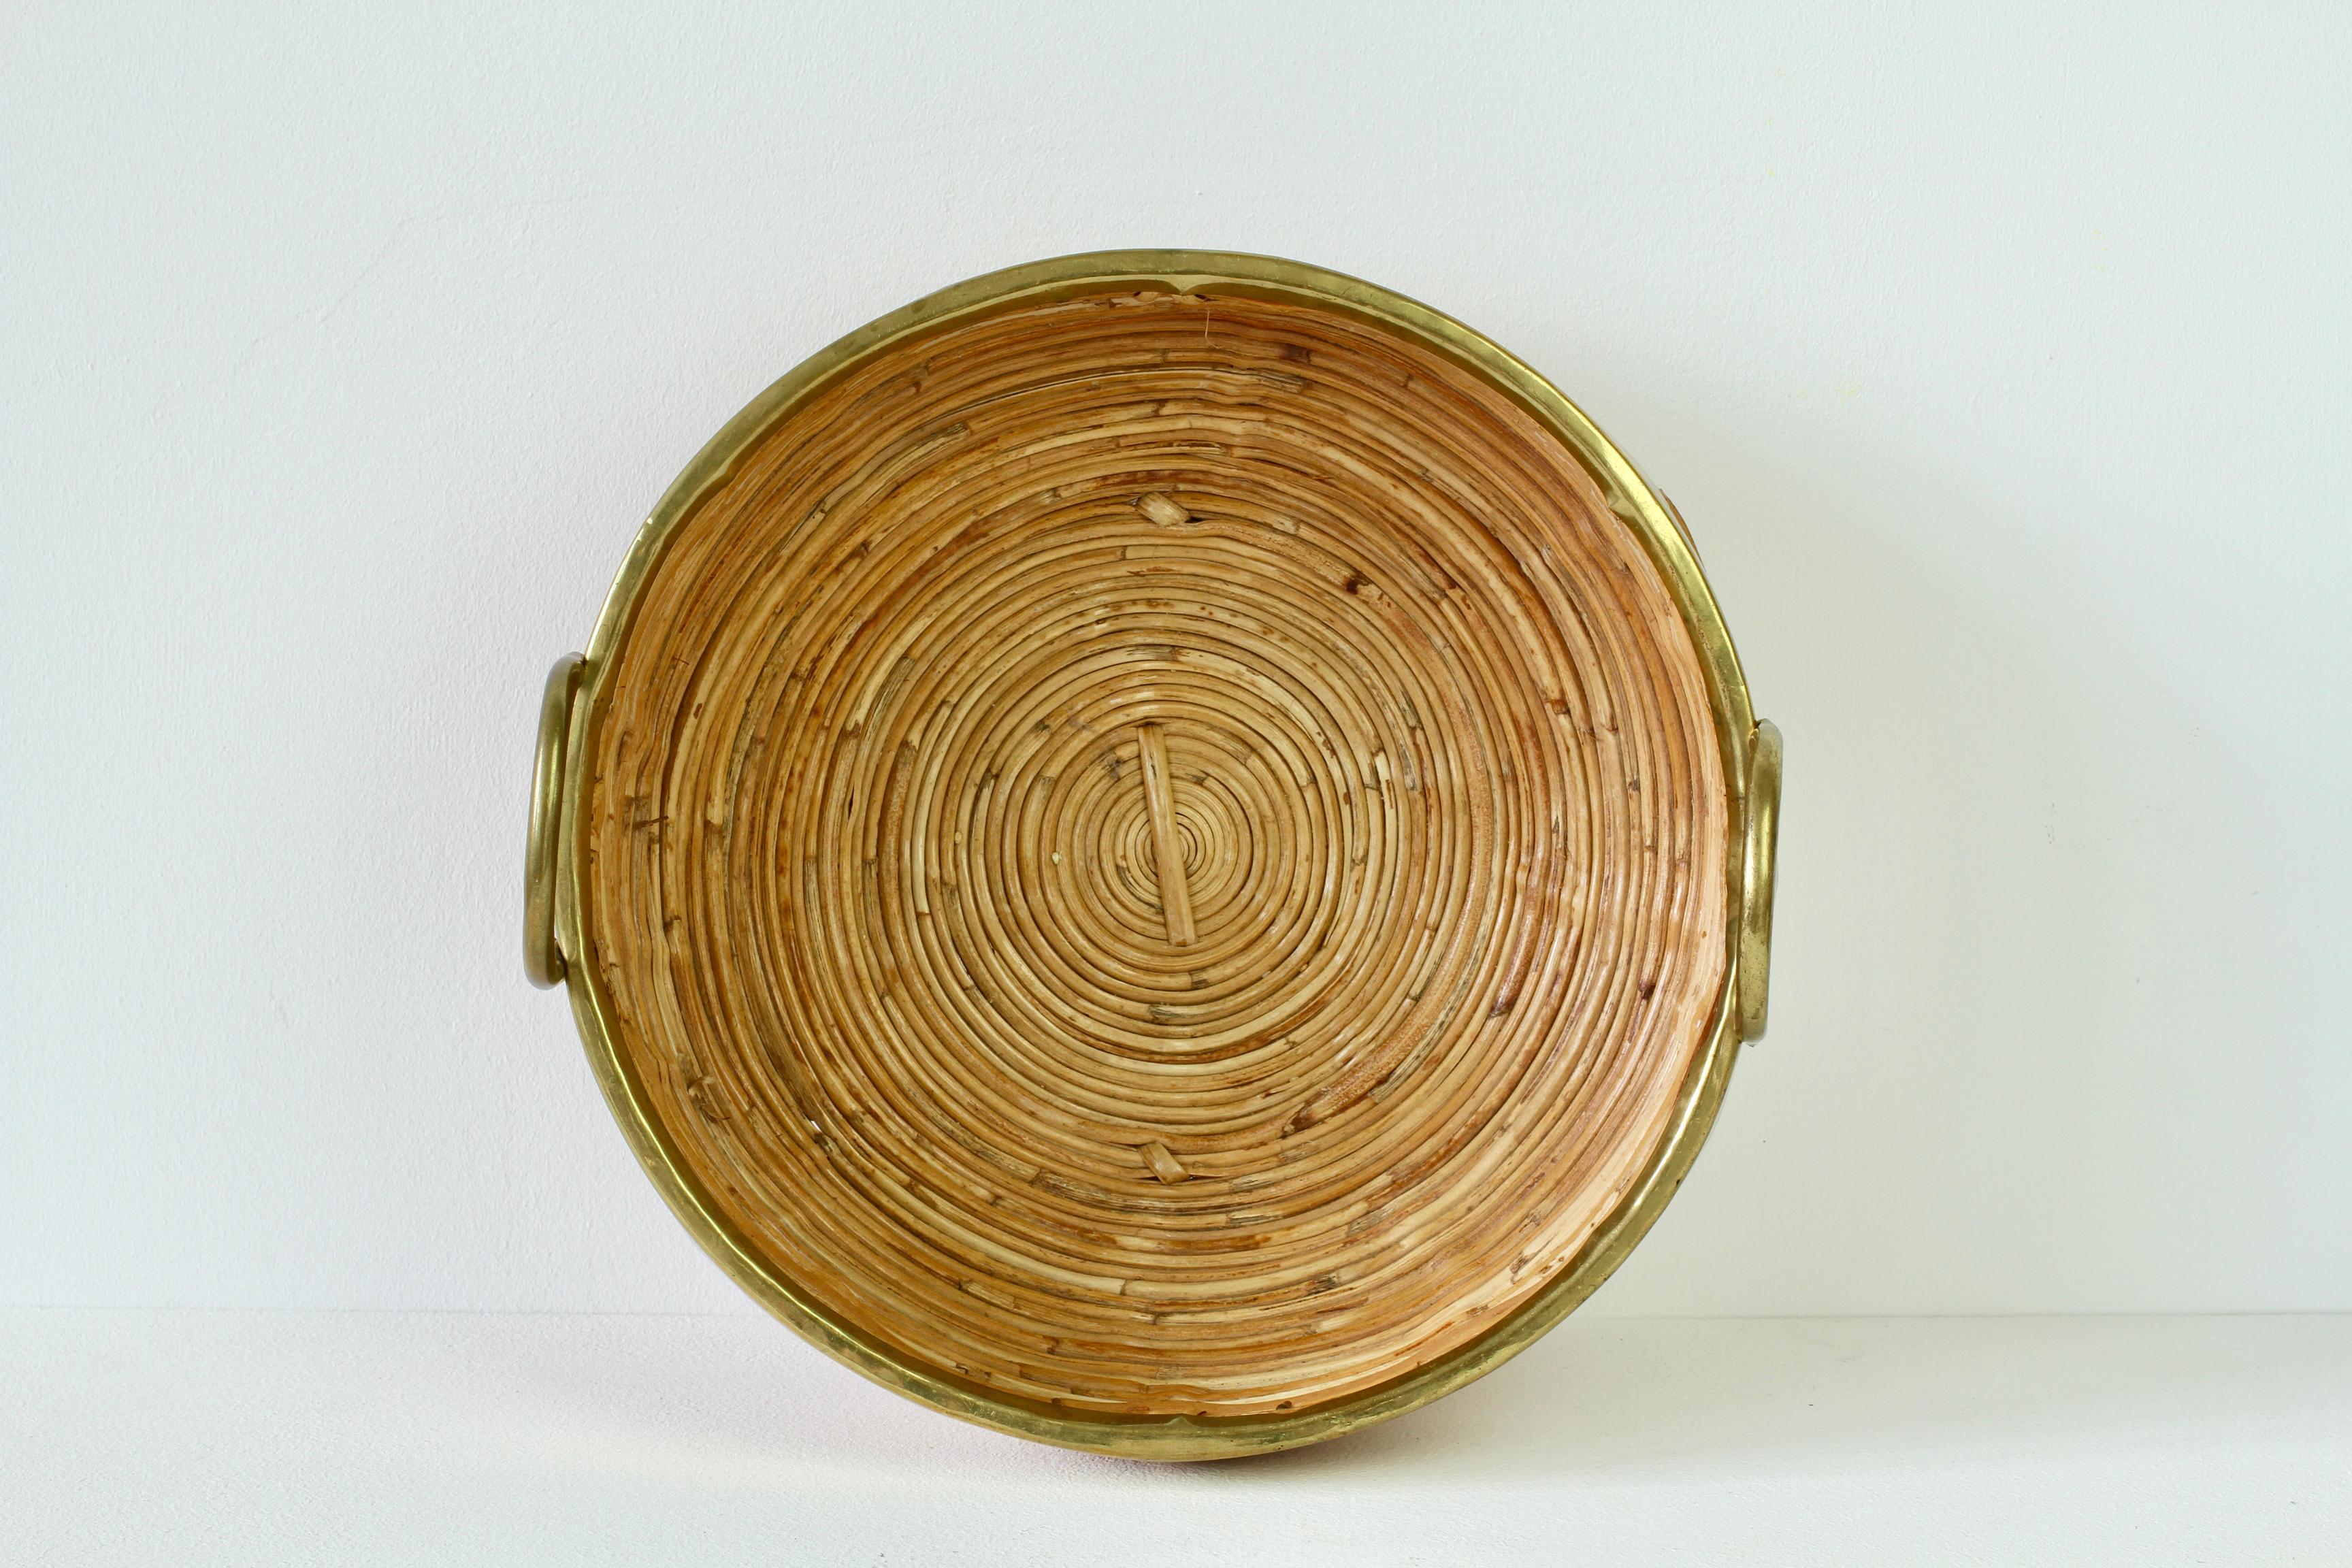 1970s Vintage Mid-Century Italian Crespi Style Bamboo and Rattan Serving Tray 9